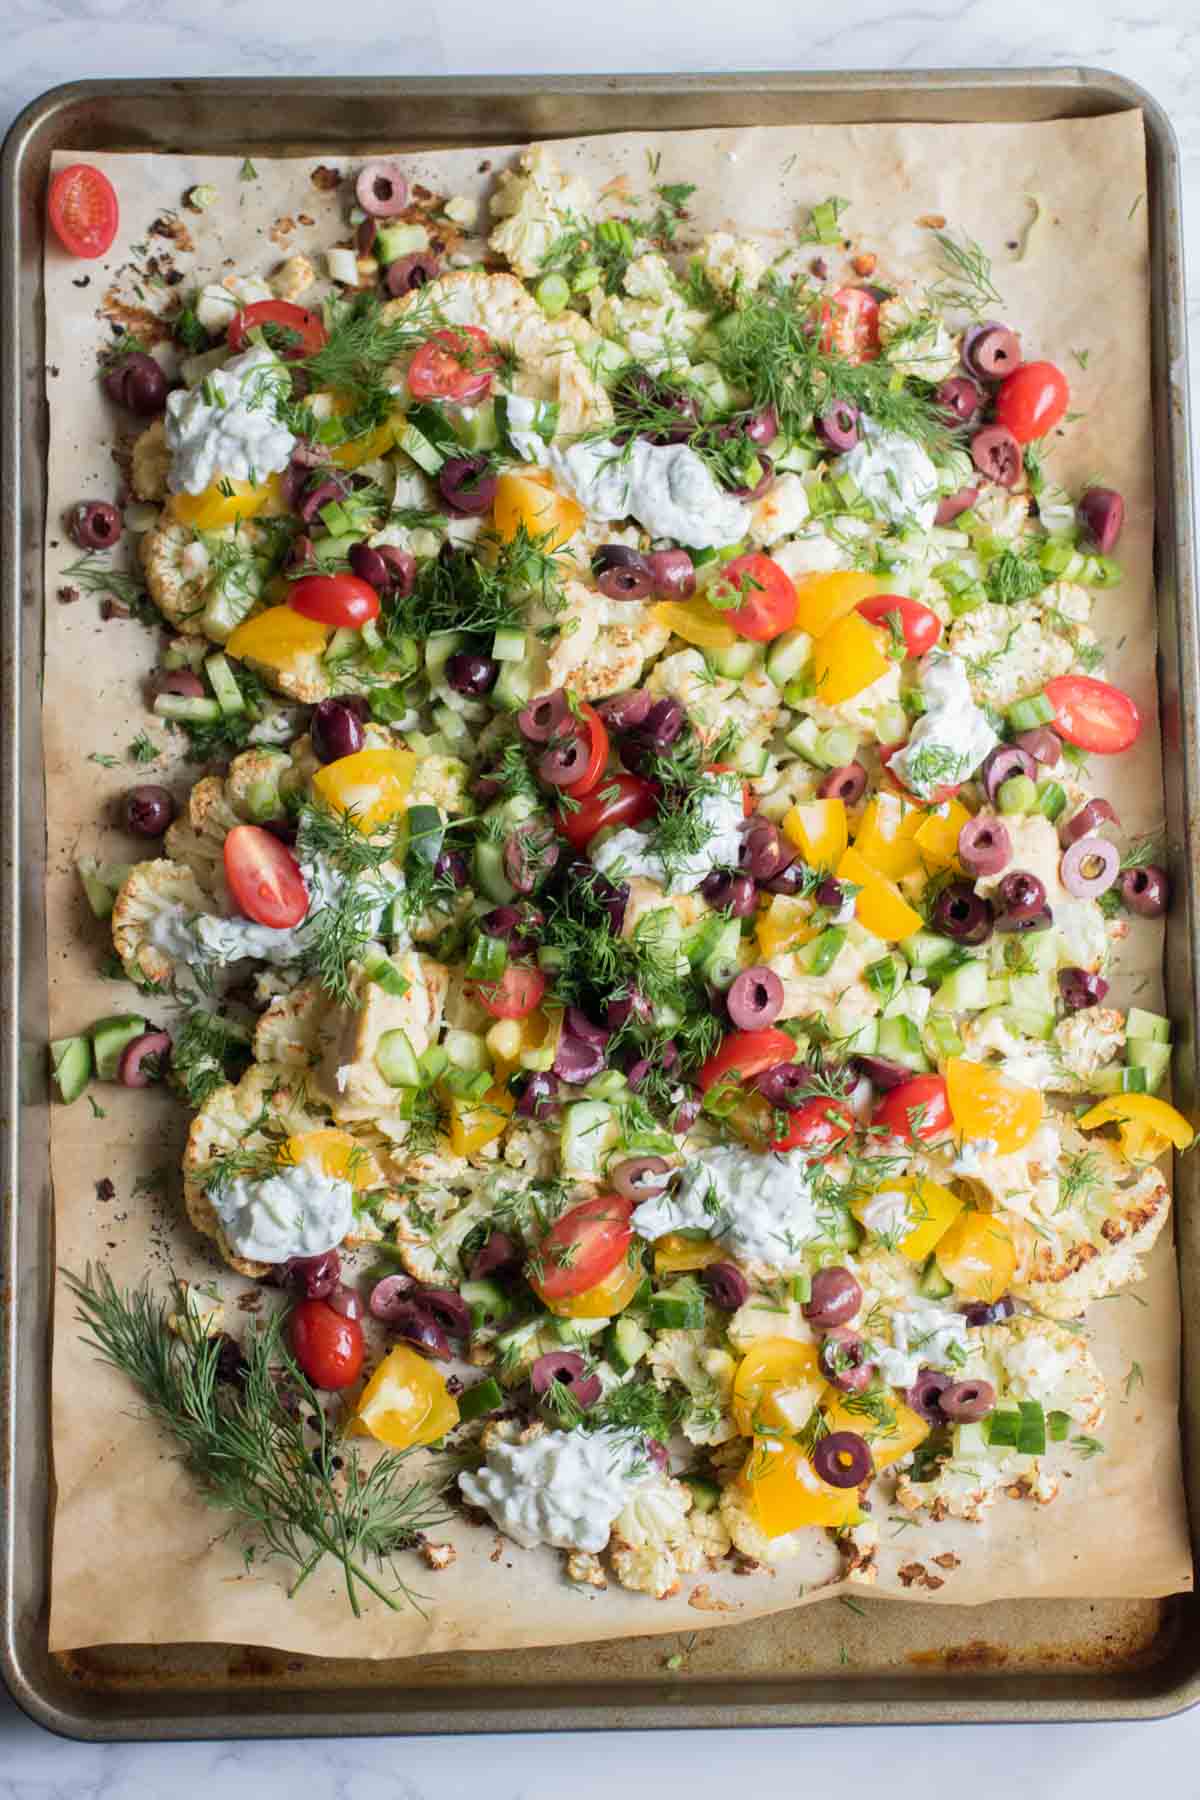 Loaded Mediterranean Cauliflower Nachos are piled high with creamy feta cheese, crunchy cucumbers, hummus, olives, tzatziki sauce and more! So delicious you won't want to share. | abraskitchen.com